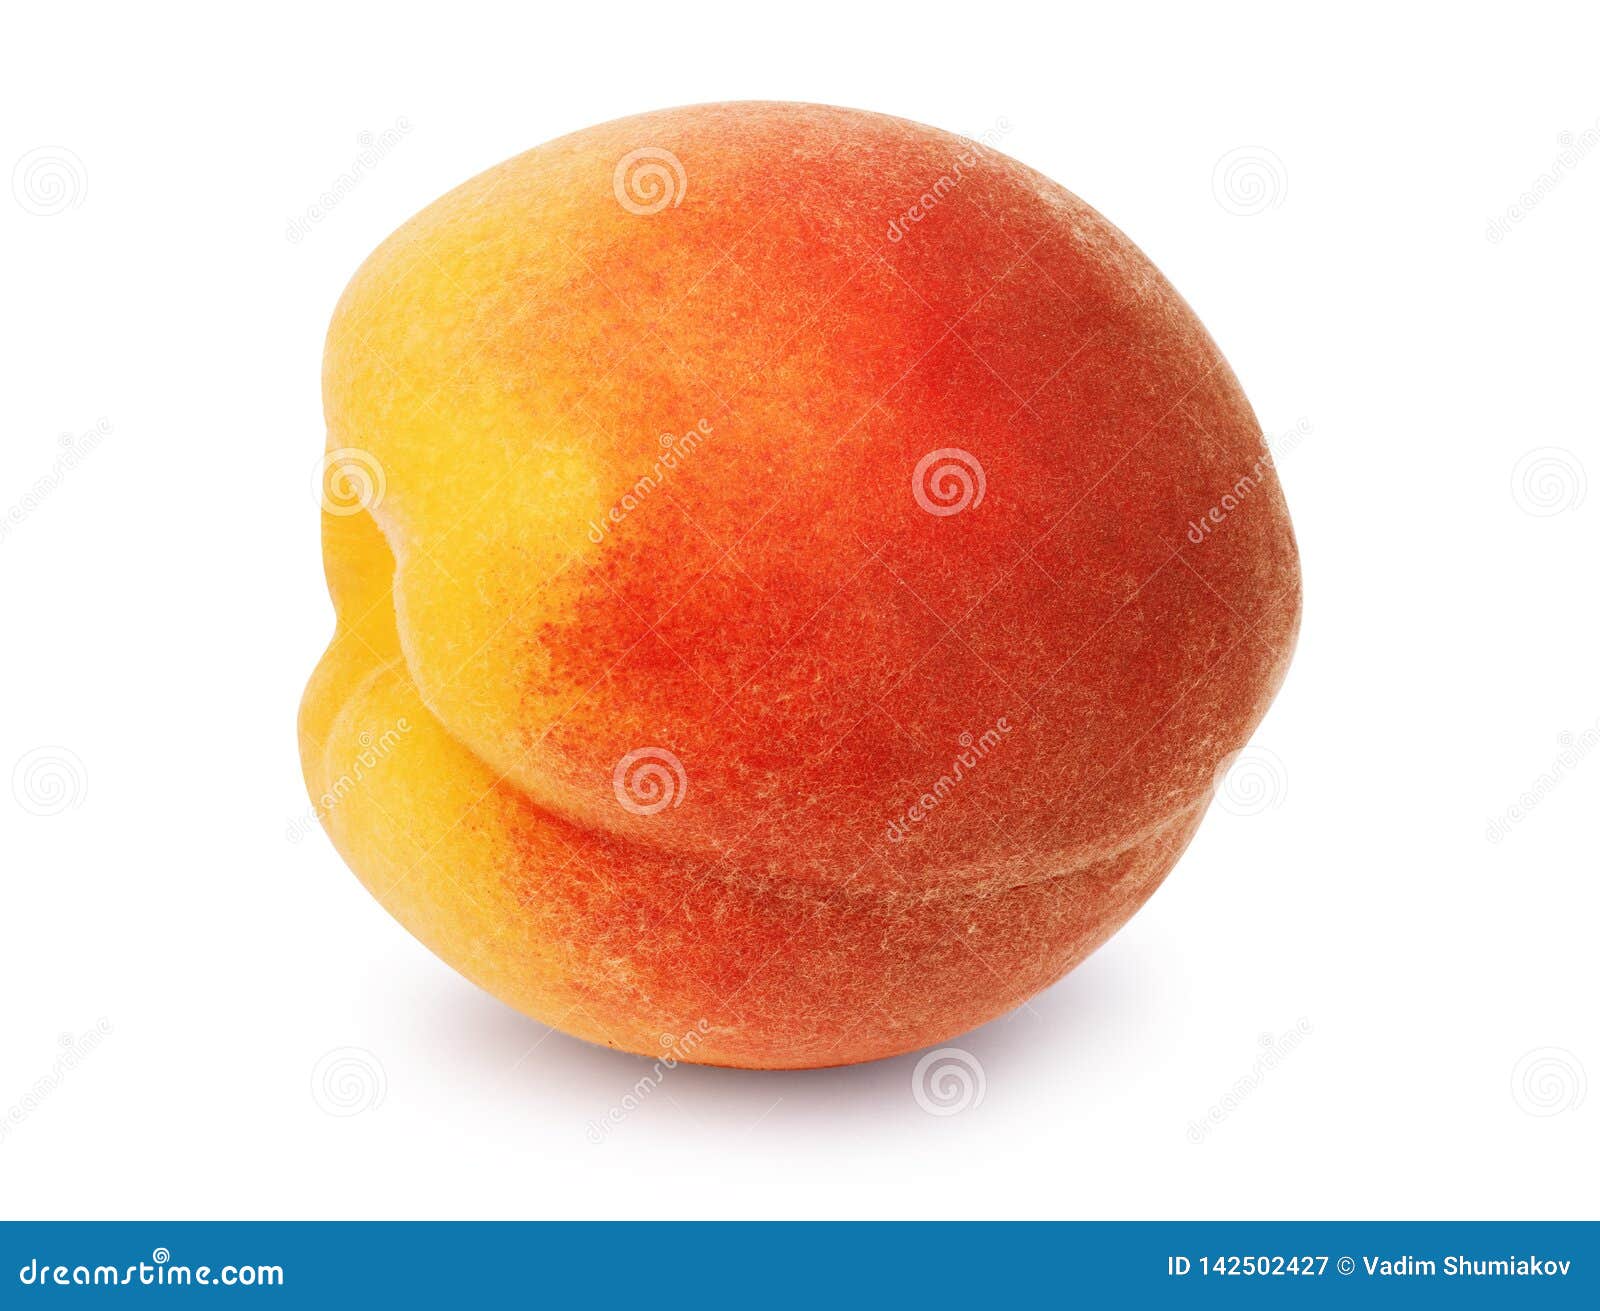 ripe juicy peach on a white background